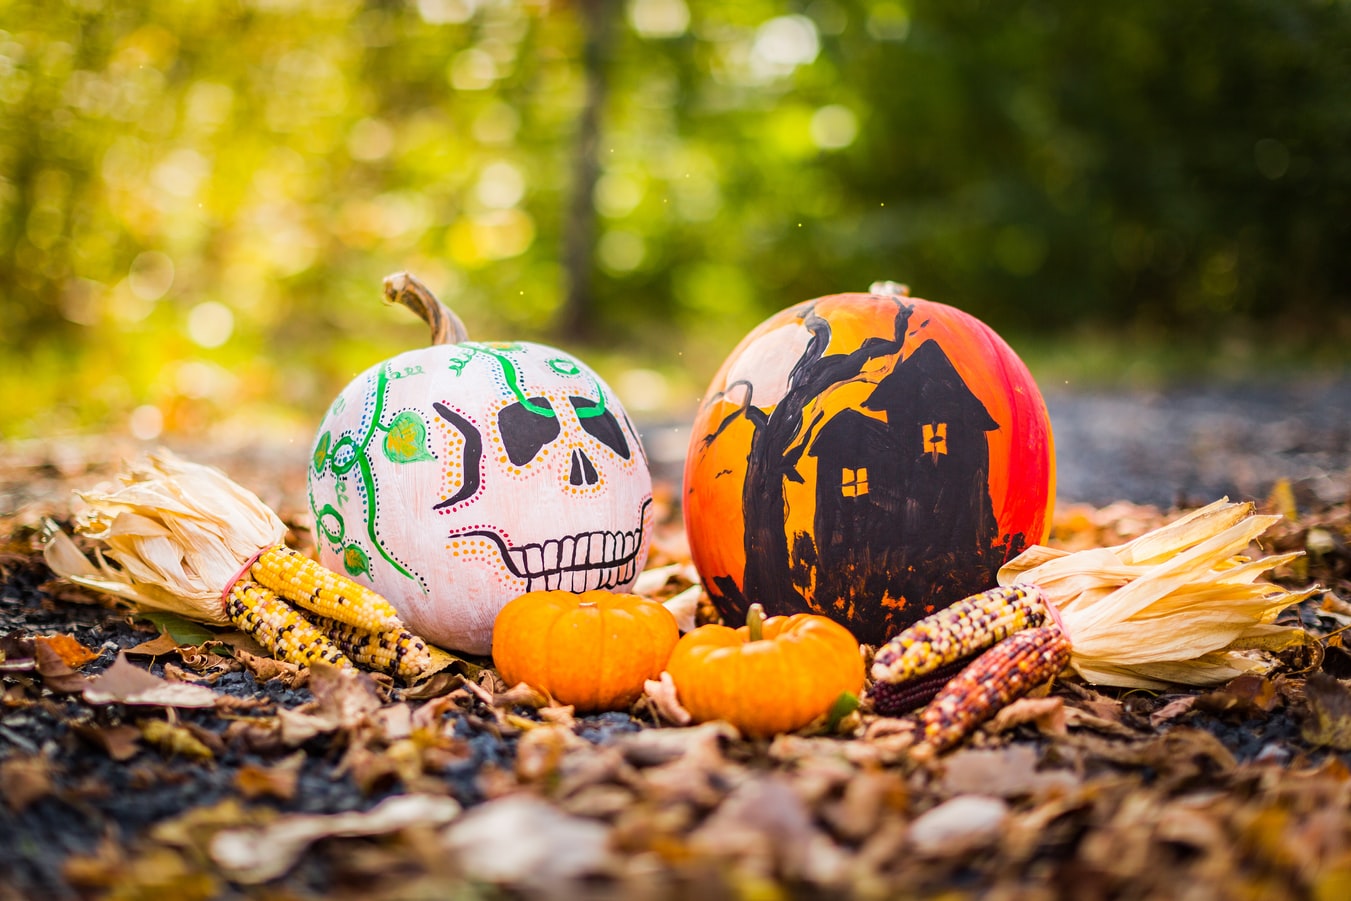 Two painted pumpkins in a pile of leaves surrounded by smaller pumpkins and dried corn husks.